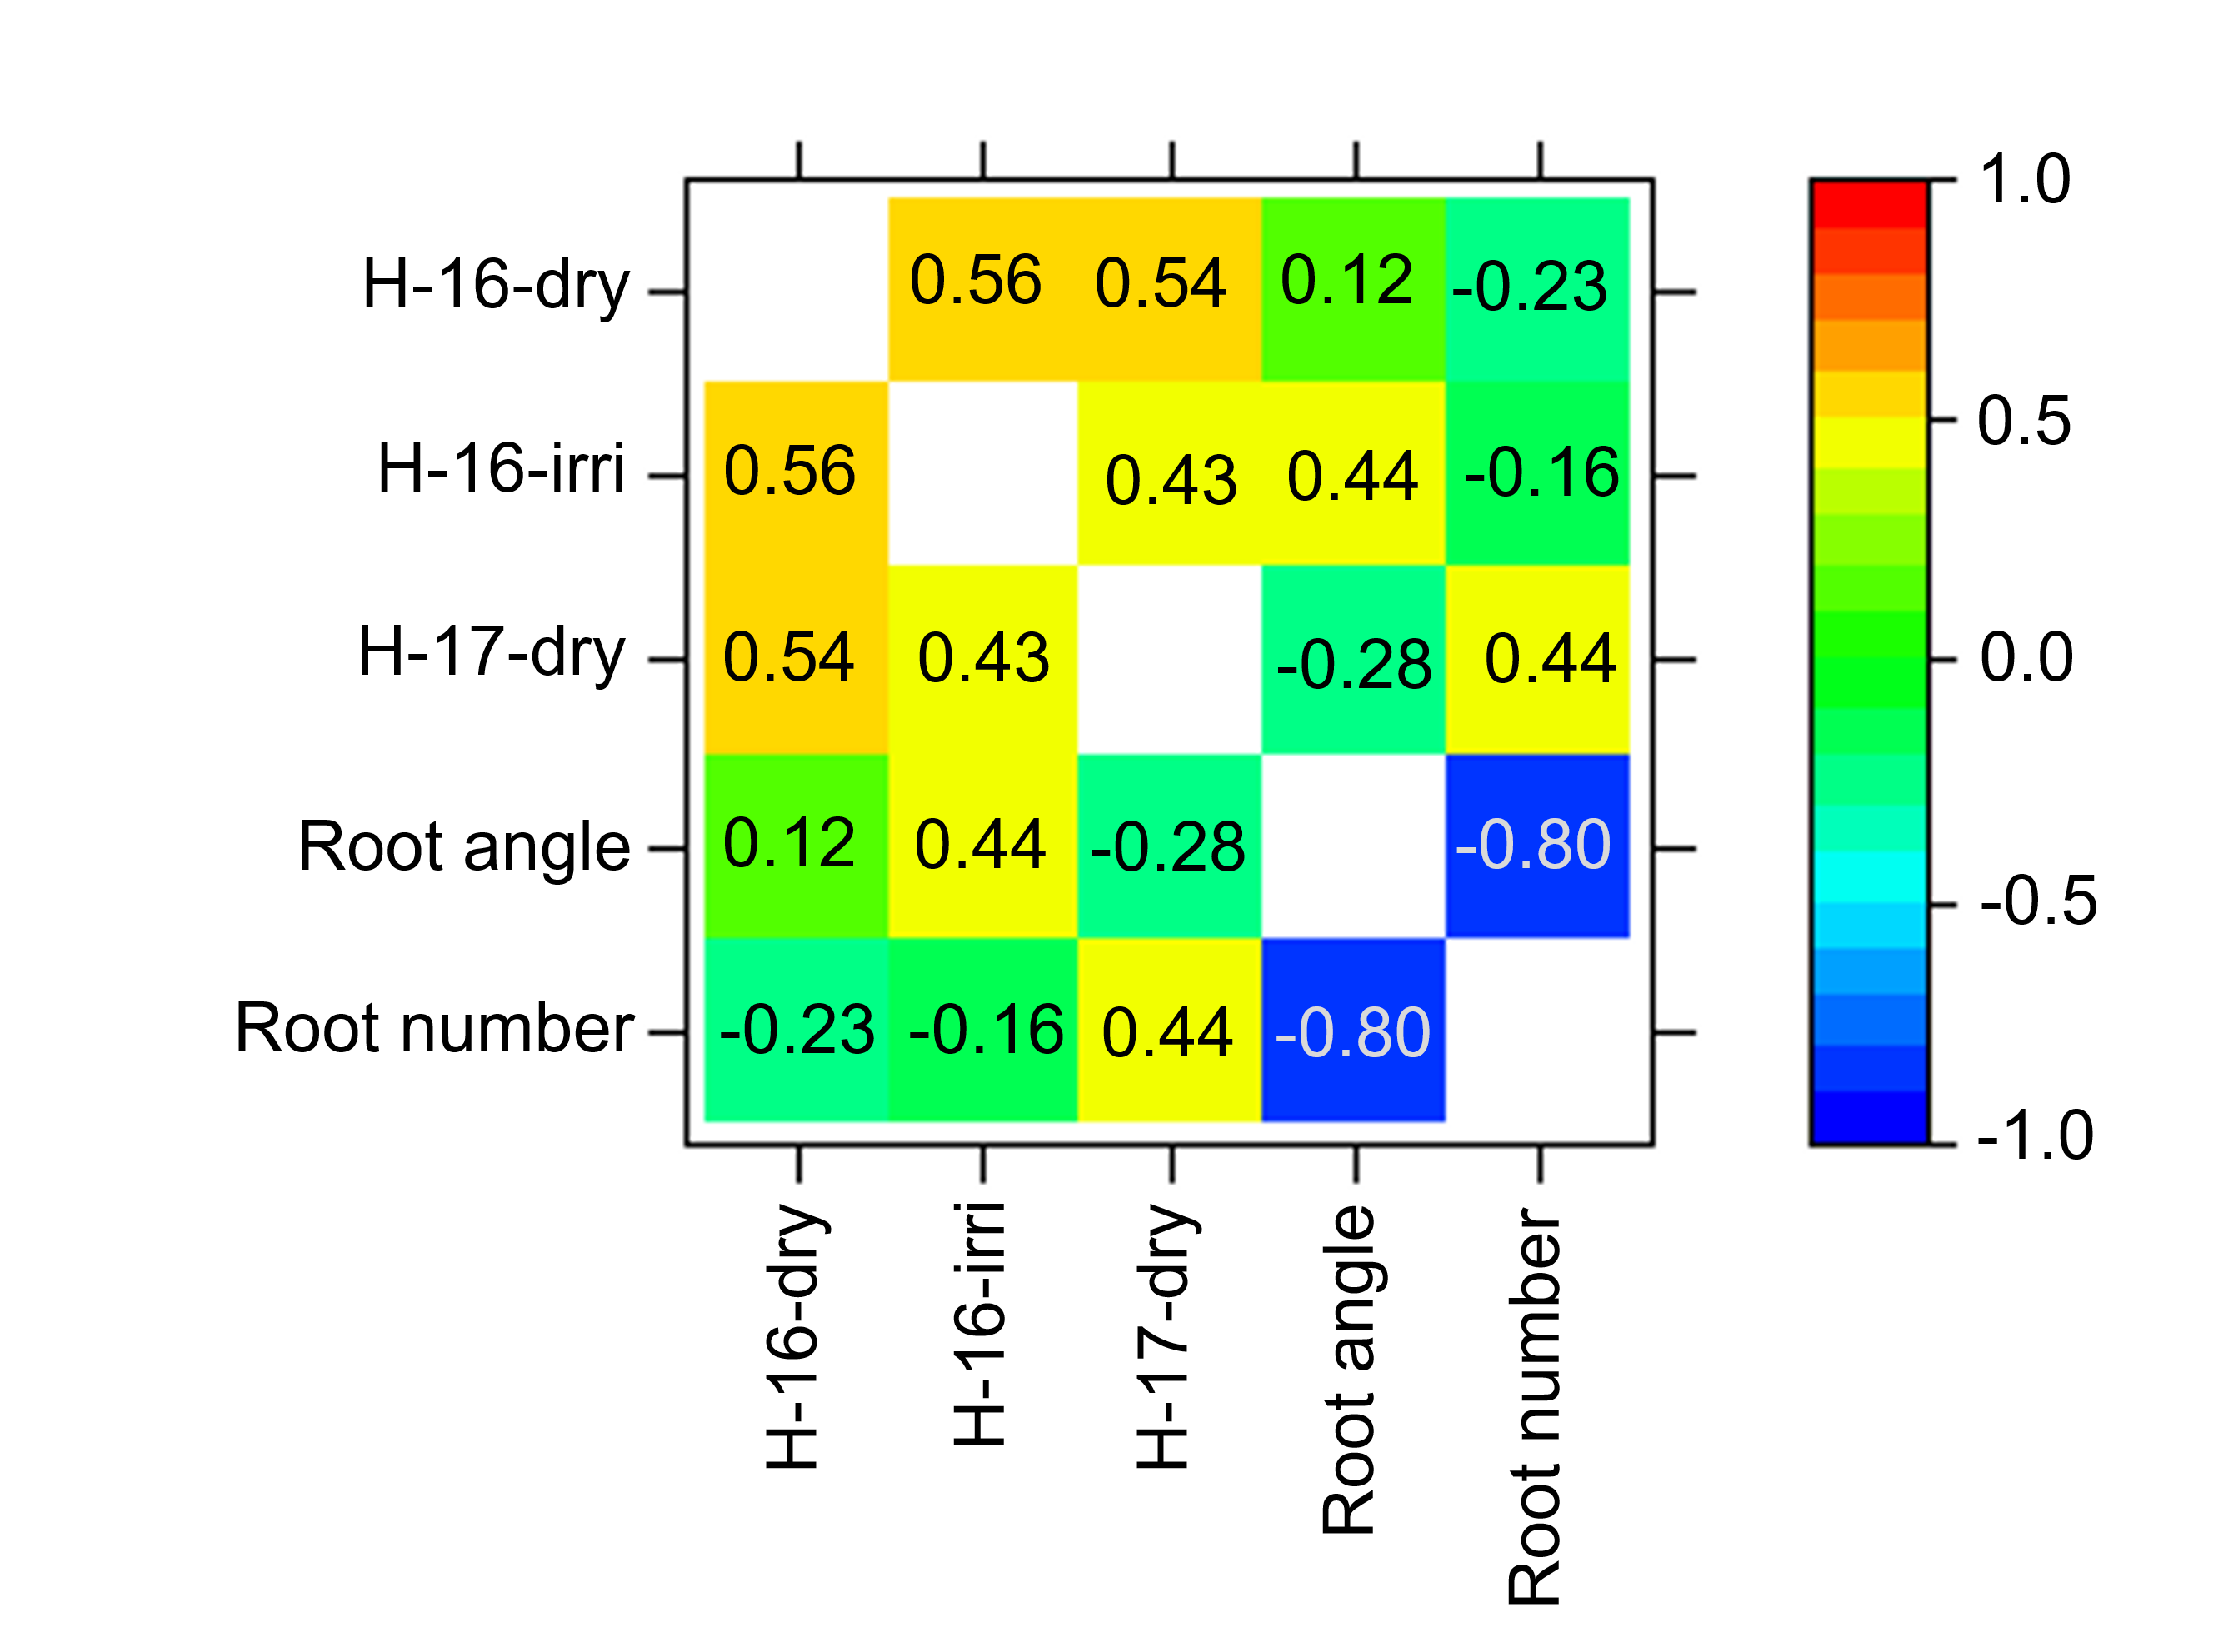 Figure 5 is a heatmap of correlations between yield trials, seminal root angle and seminal root number. Positive correlations between traits increase with increasing colour intensity (darker) and negative correlations with decreasing colour intensity (paler).